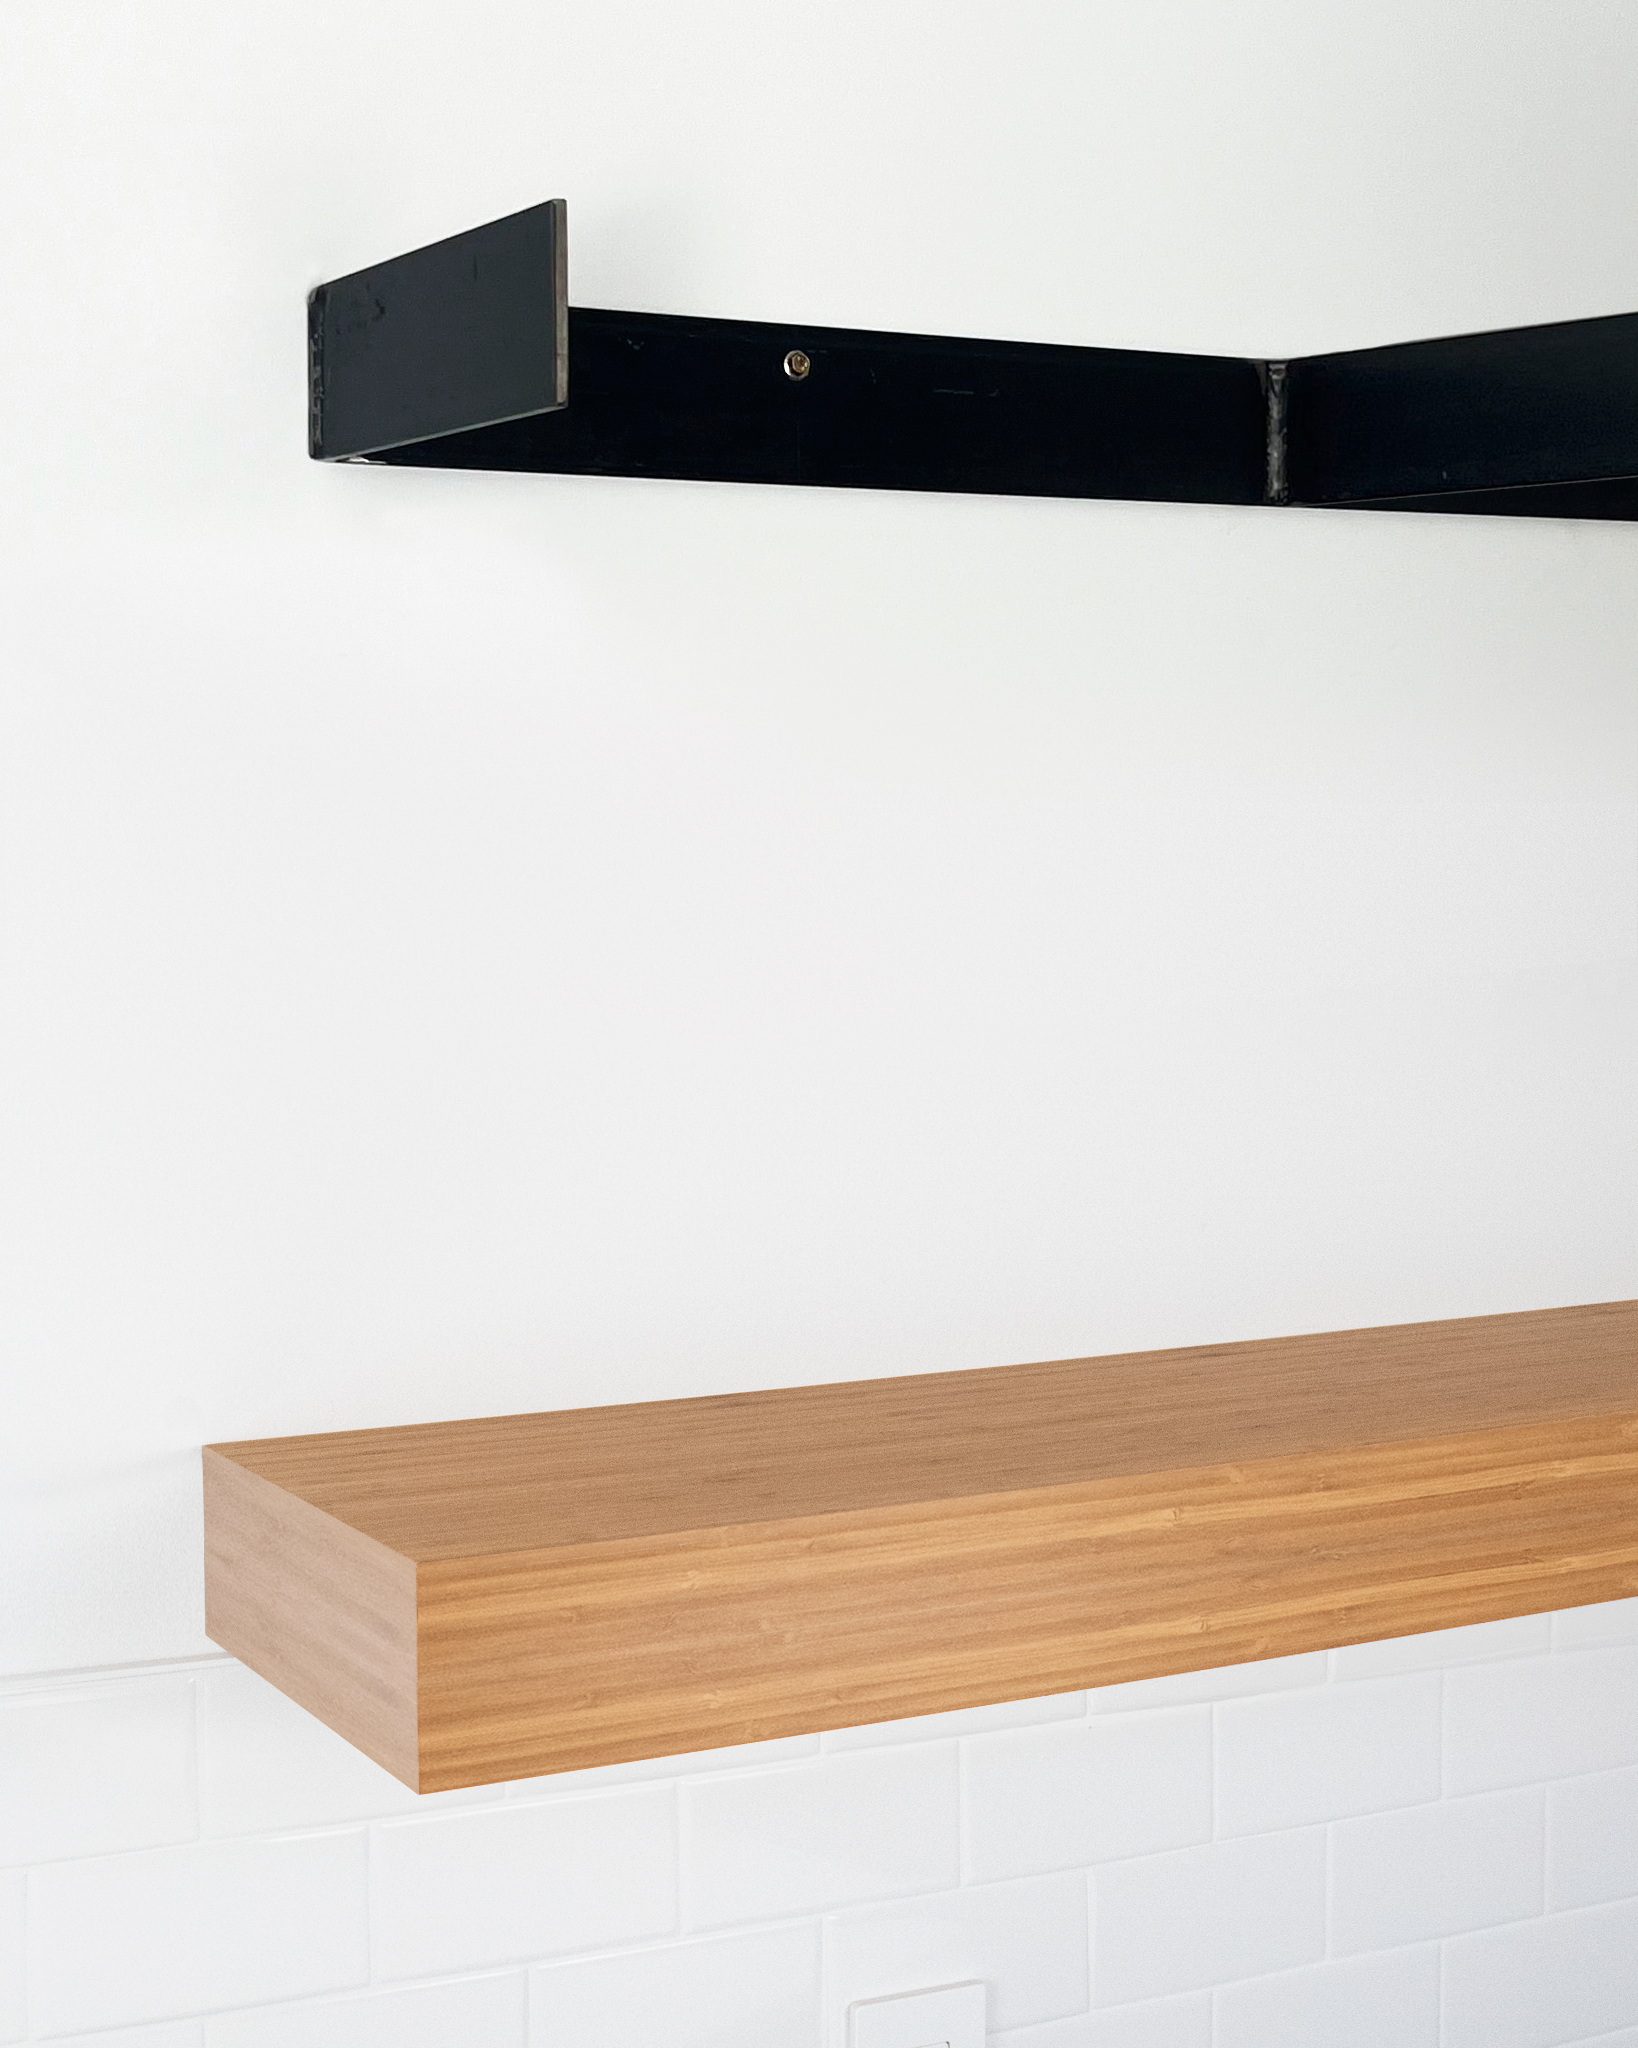 Bamboo Floating Shelves 2-4" thick